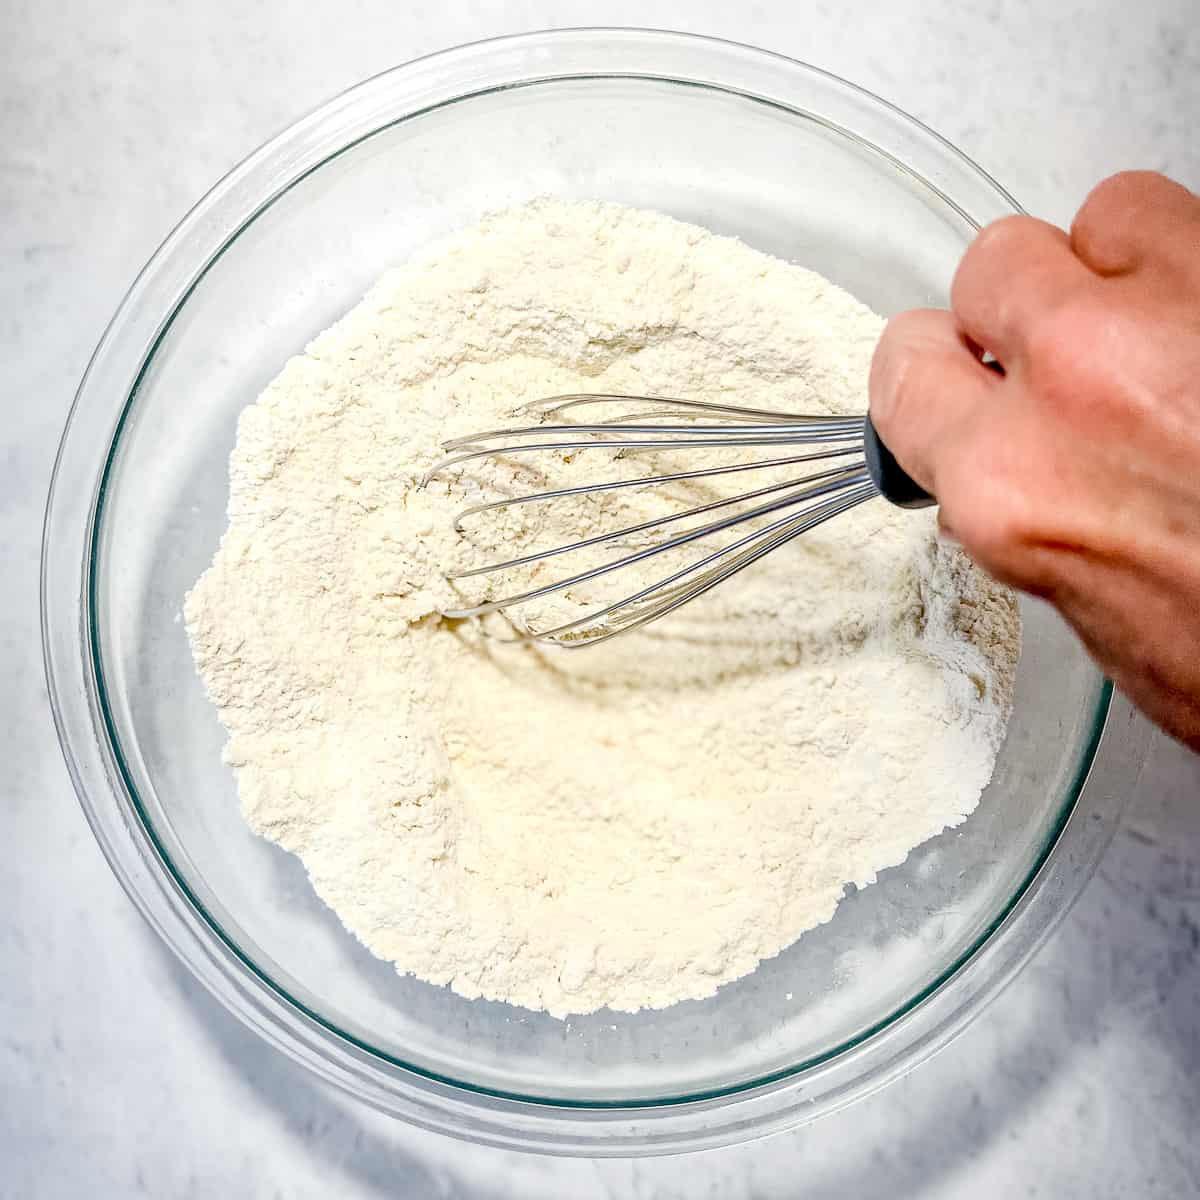 whisking dry ingredients together